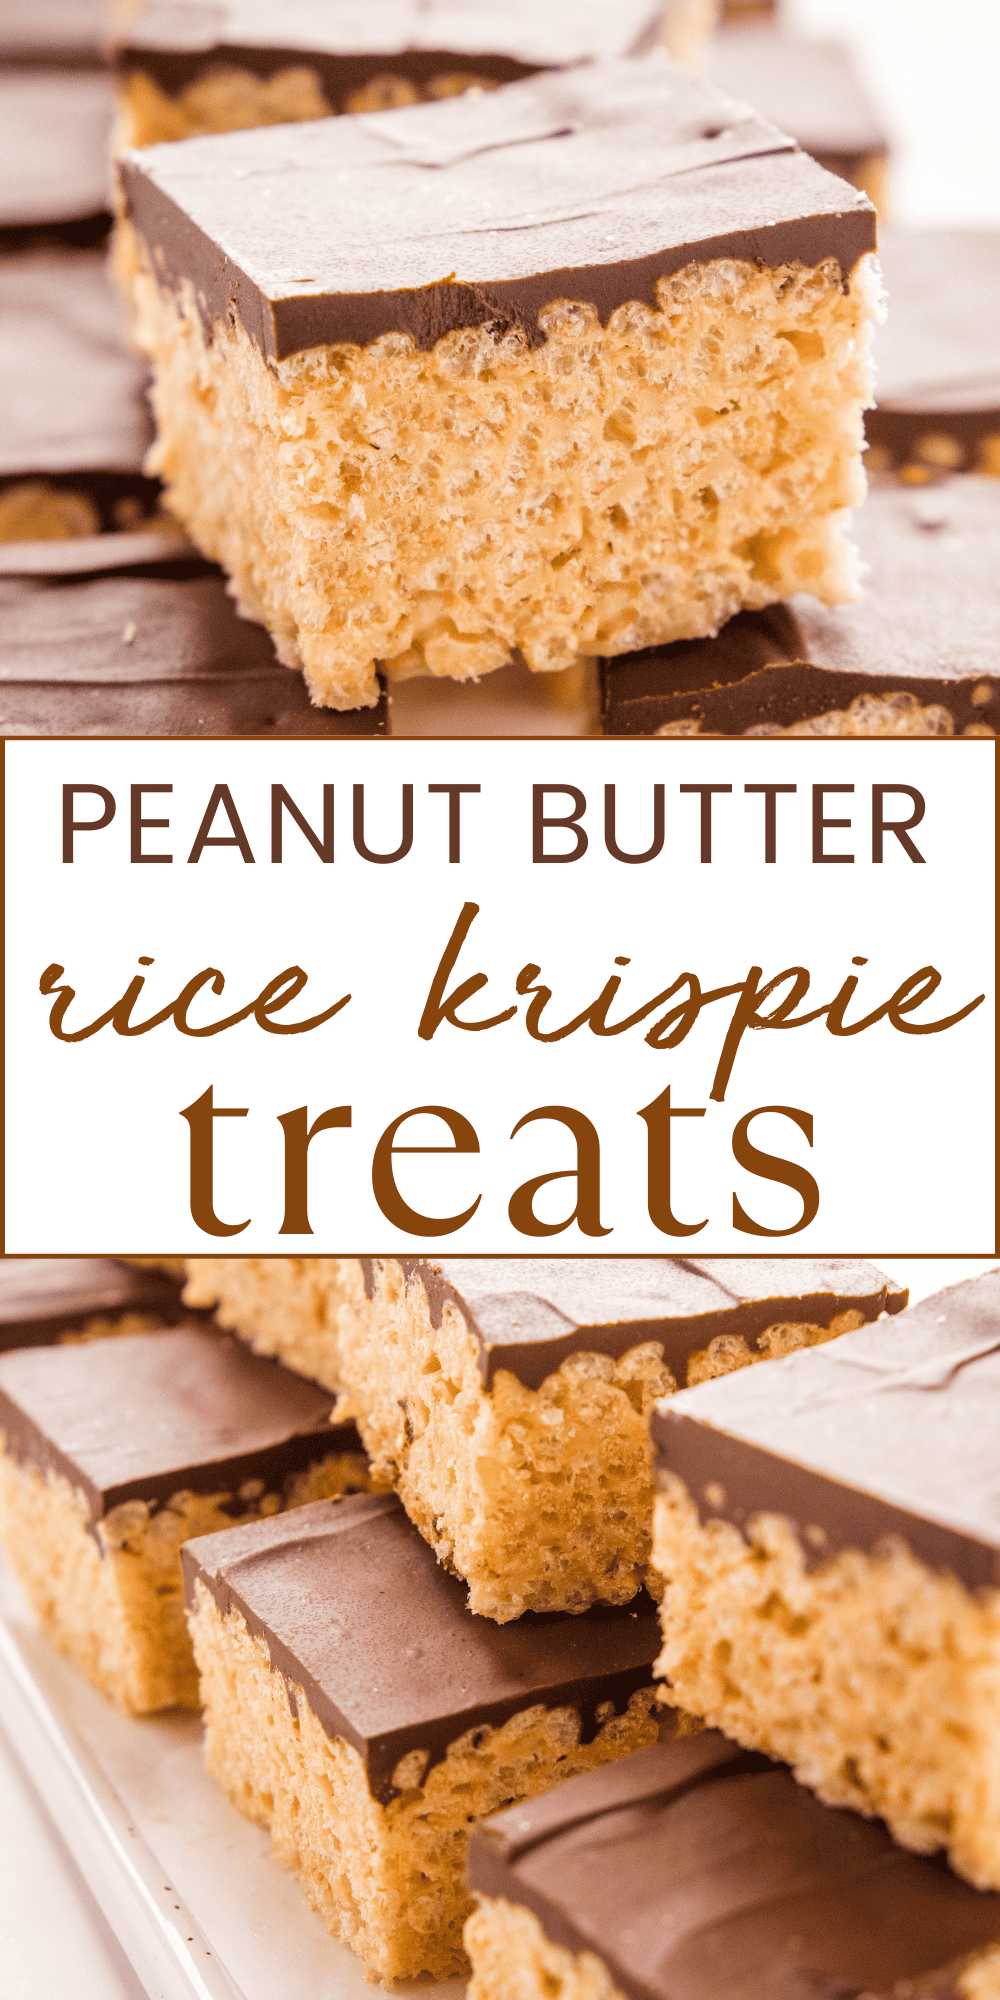 This Peanut Butter Rice Krispie Treats recipe is an easy sweet snack or dessert that's made with creamy peanut butter, marshmallows, puffed rice cereal and chocolate. A twist on the classic Rice Krispie Treats! Recipe from thebusybaker.ca! #ricekrispietreats #ricekrispies #peanutbutterricekrispietreats #peanutbutterdessert #sweettreat #peanutbutterdessert #easydessert #bakewithkids #nobake via @busybakerblog